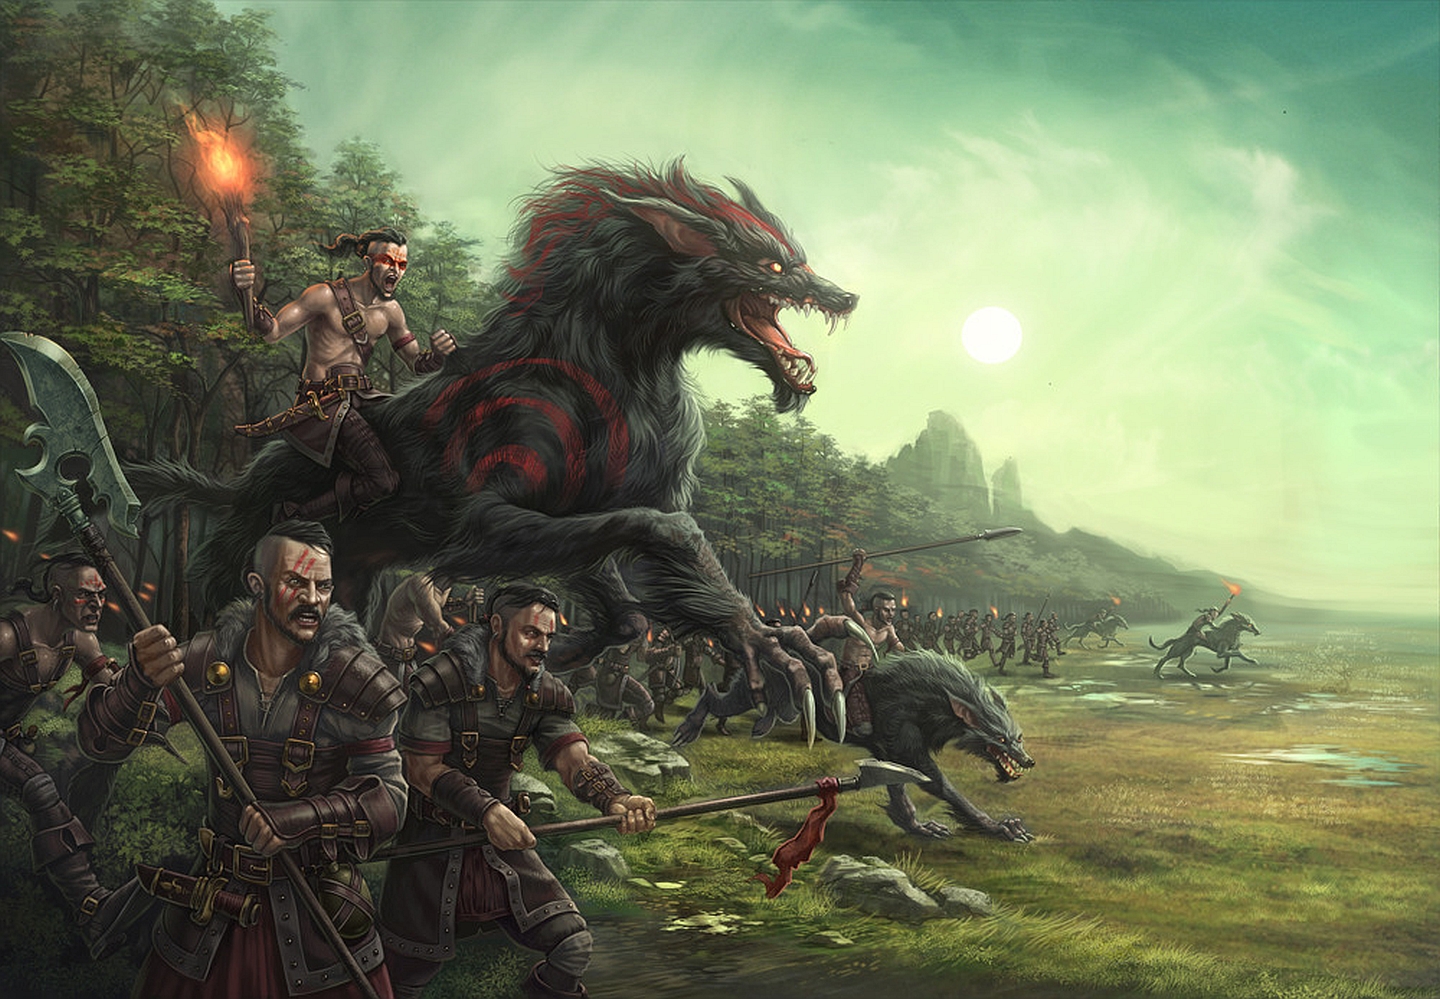 battle wallpaper,action adventure game,pc game,mythology,strategy video game,cg artwork